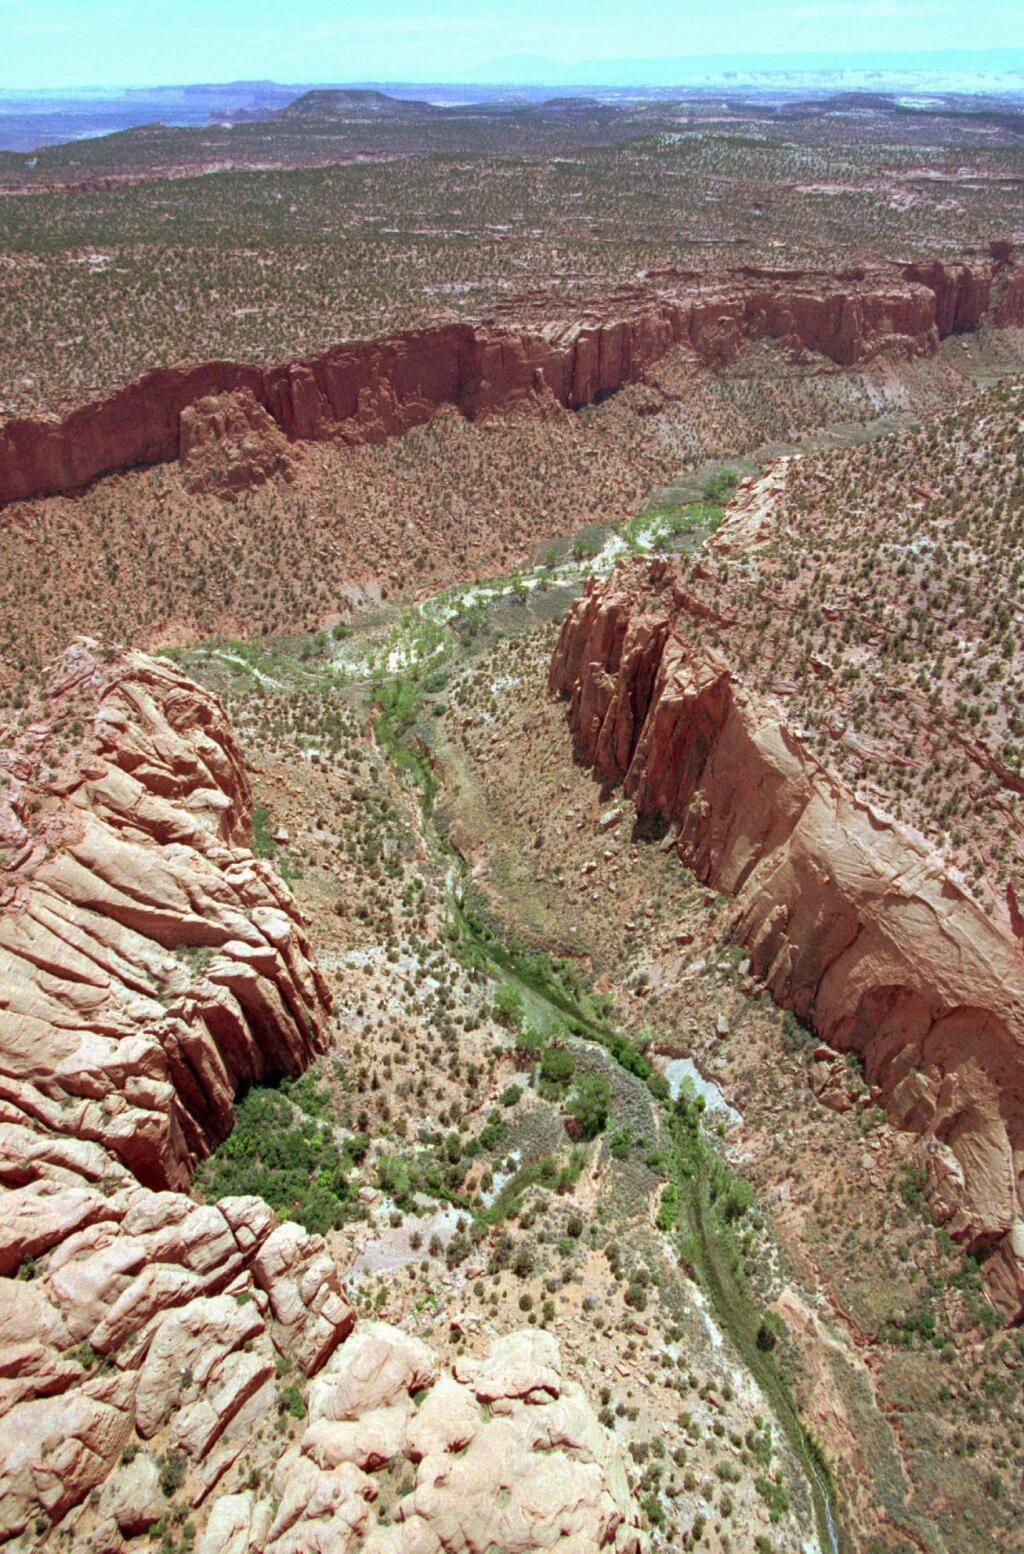 FILE - This May 30, 1997, file photo, shows the varied terrain of Grand Staircase-Escalante National Monument near Boulder, Utah. Interior Secretary Ryan Zinke is recommending that six of 27 national monuments under review by the Trump administration be reduced in size, along with management changes to several other sites. A leaked memo from Zinke to President Donald Trump recommends that two Utah monuments - Bears Ears and Grand Staircase Escalante - be reduced, along with Nevada's Gold Butte and Oregon's Cascade-Siskiyou. (AP Photo/Douglas C. Pizac, File)